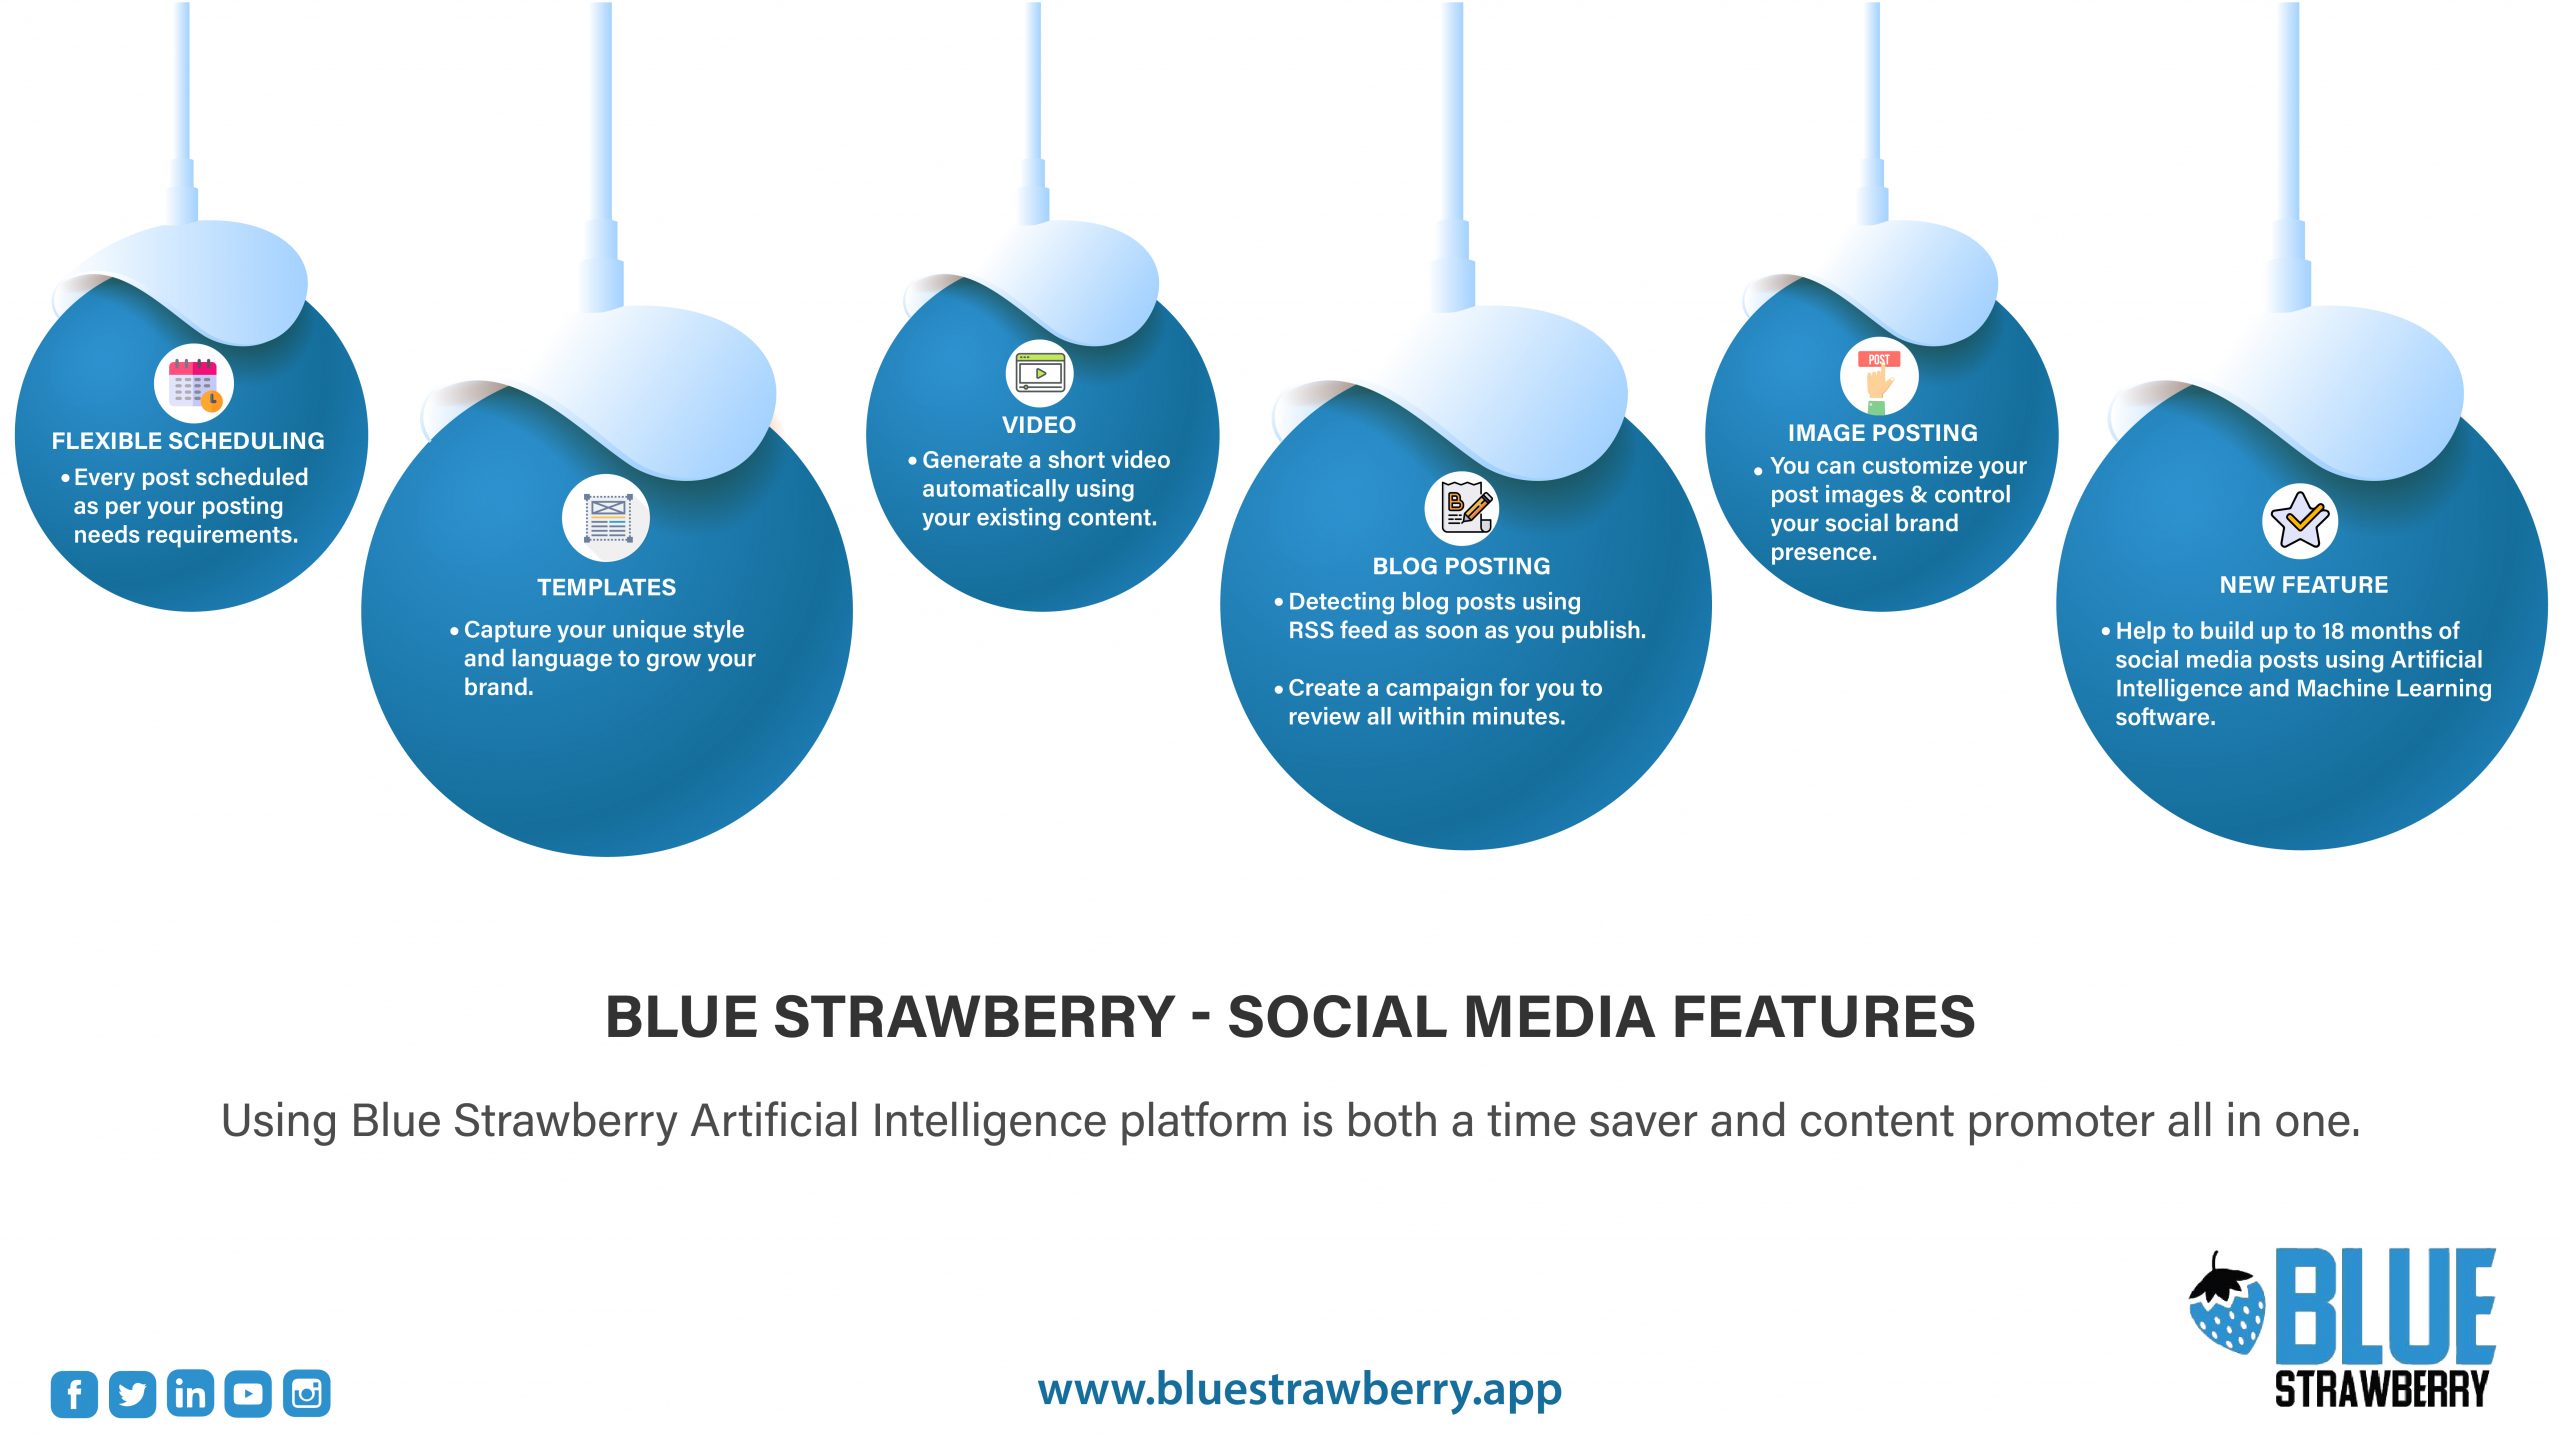 Blue Strawberry - Social Media Features Infographic